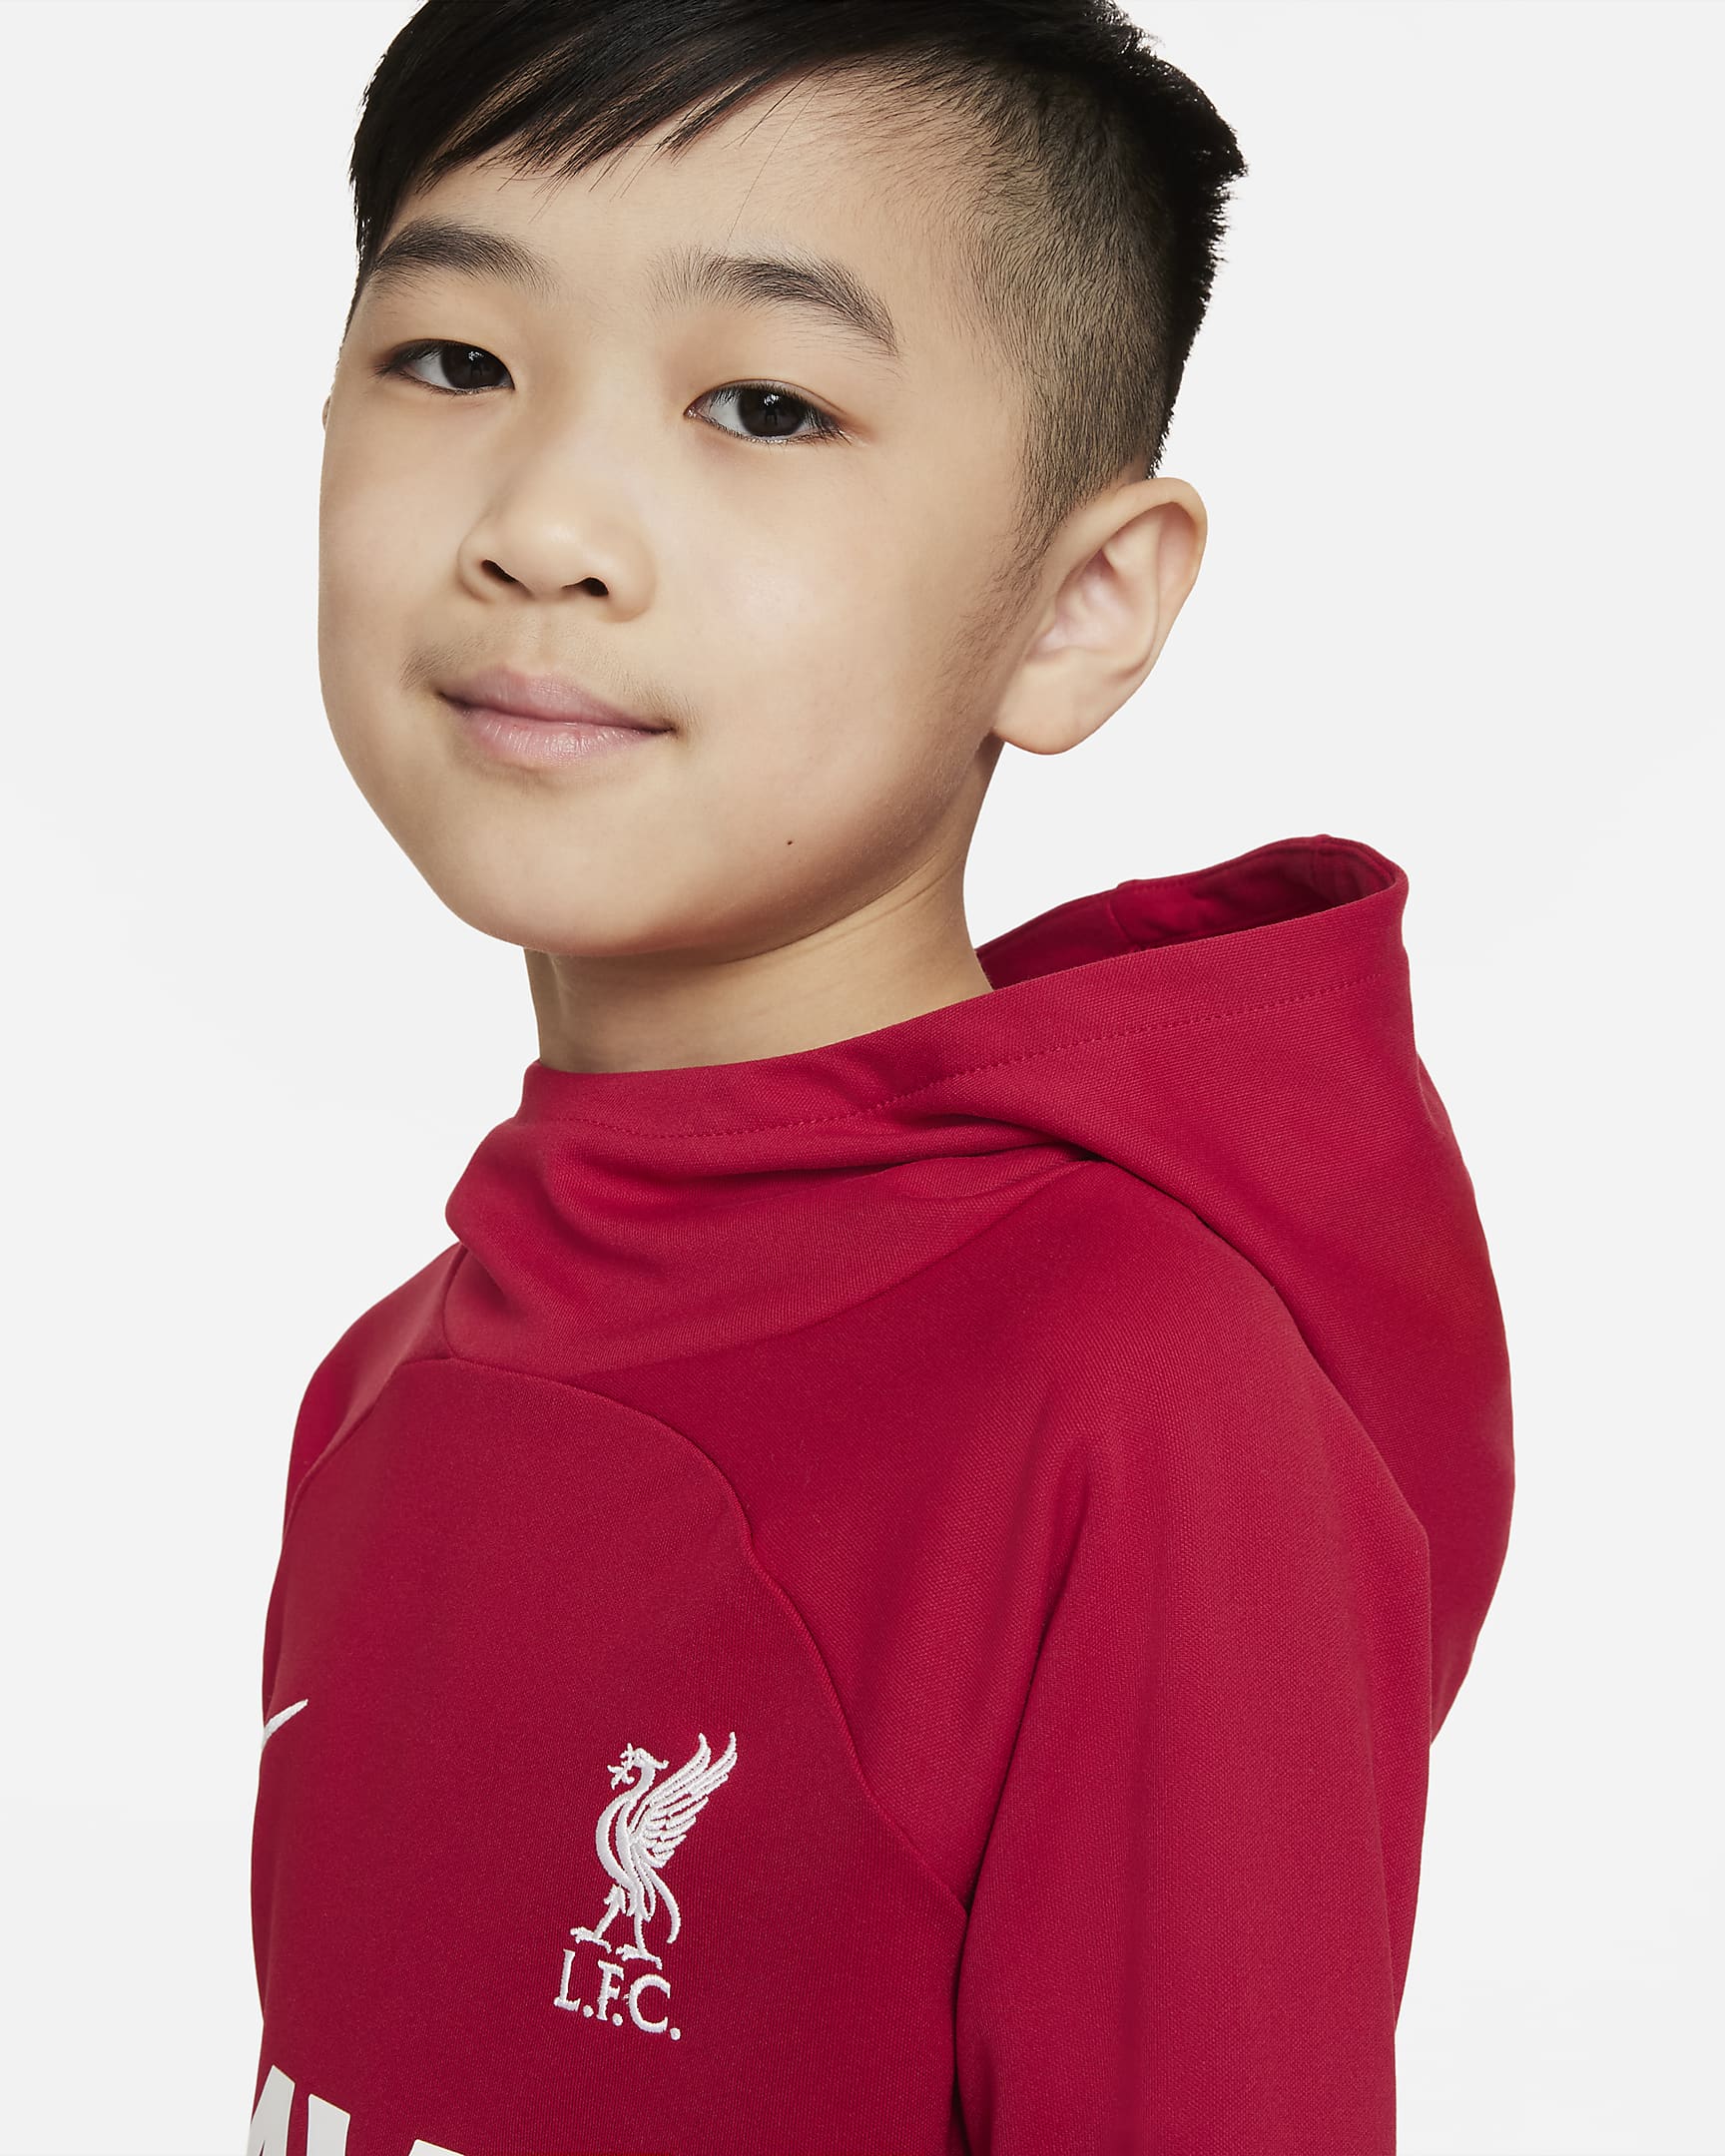 Liverpool F.C. Academy Pro Younger Kids' Nike Dri-FIT Football Hoodie ...